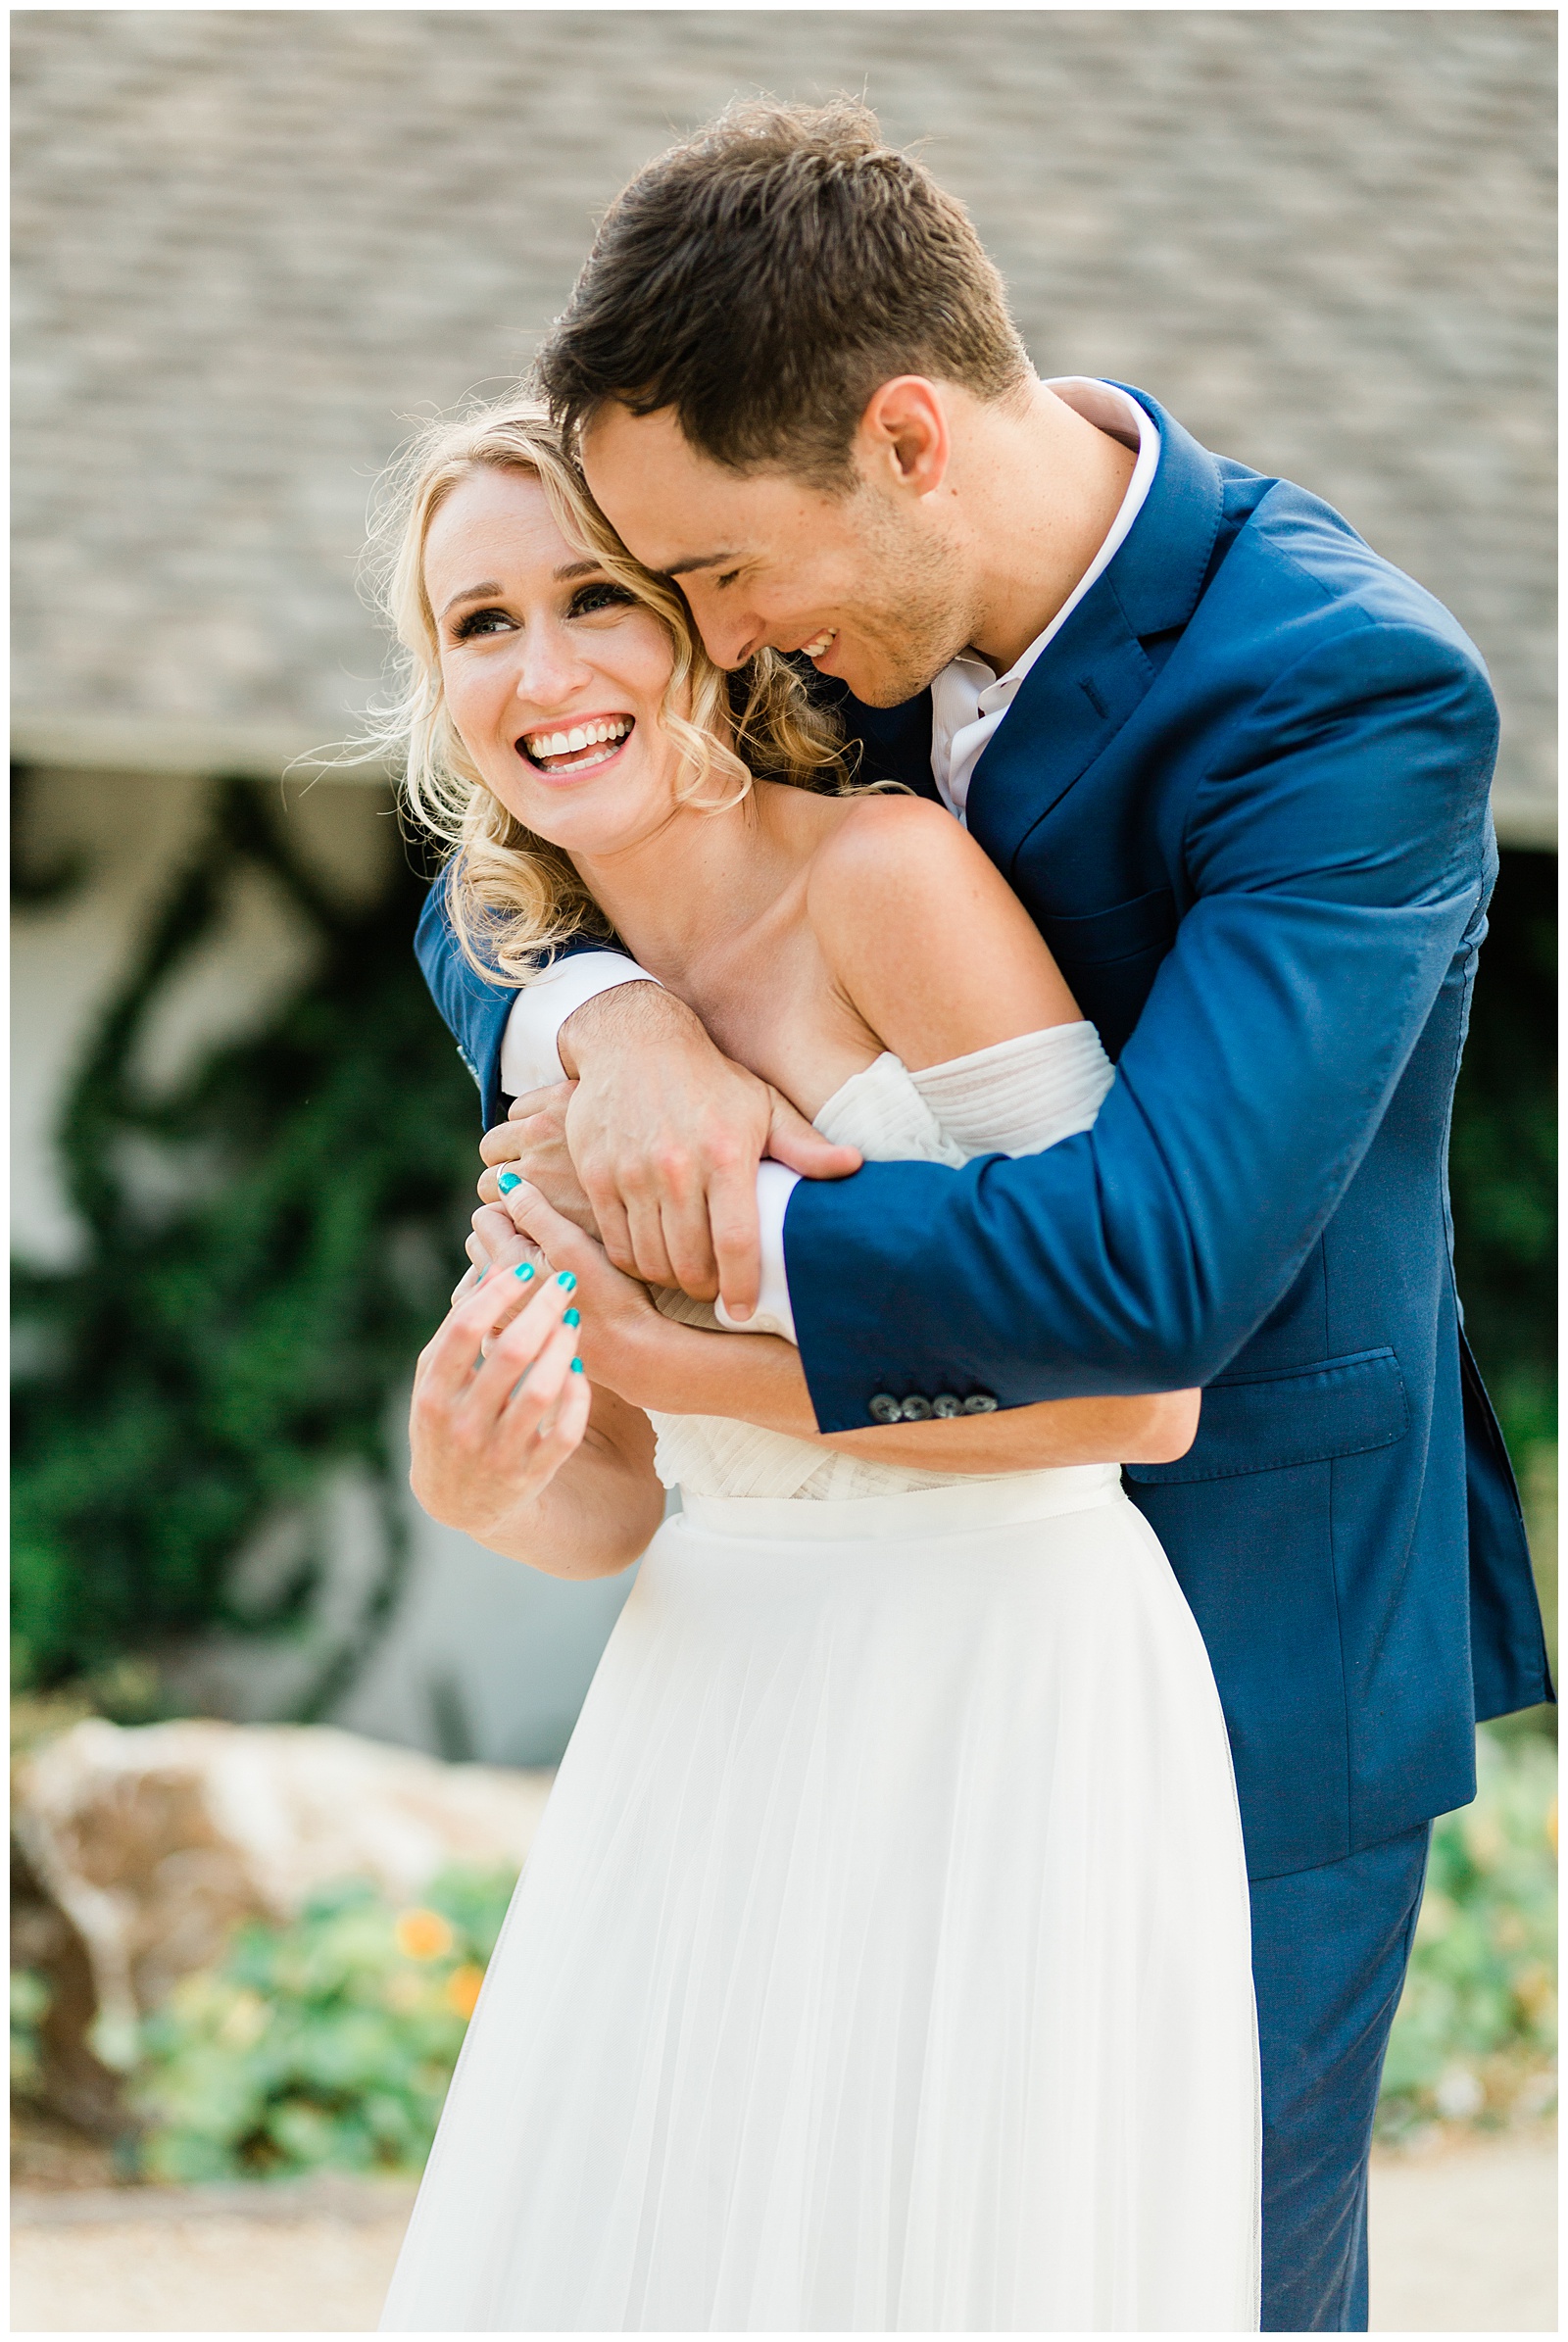 Candid wedding portrait of a newlywed couple hugging and laughing